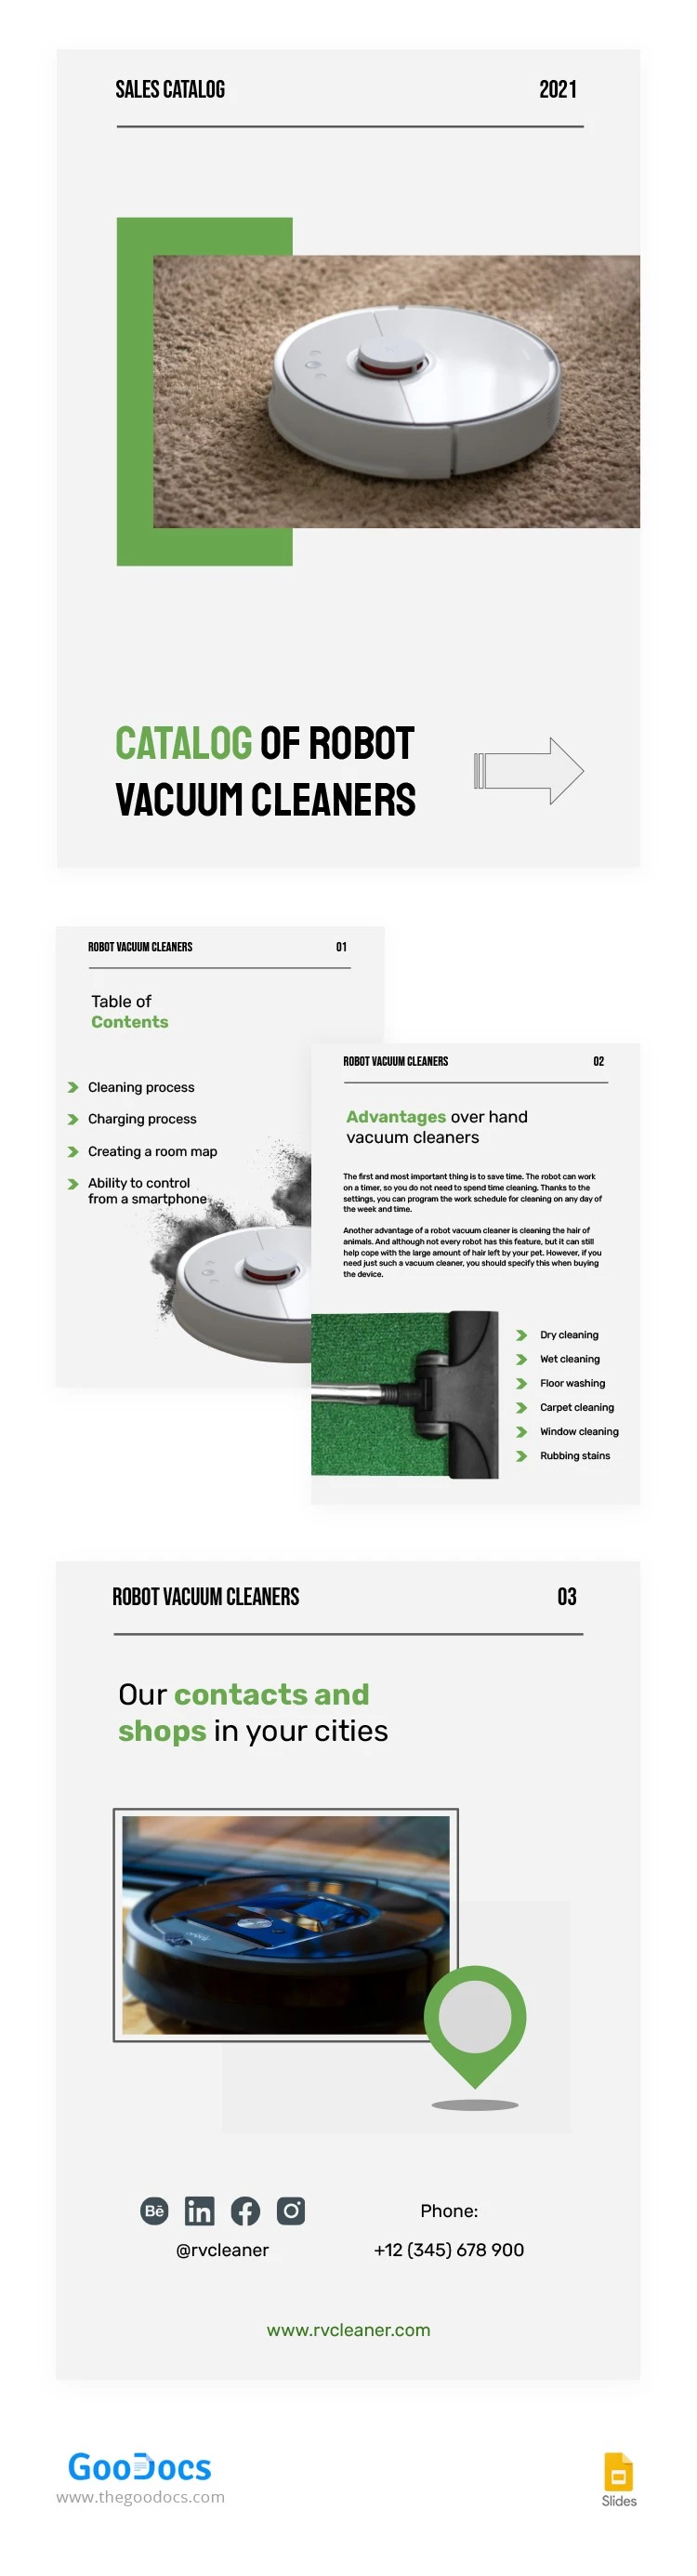 Sales Catalog of Robot Vacuum Cleaners - free Google Docs Template - 10062955